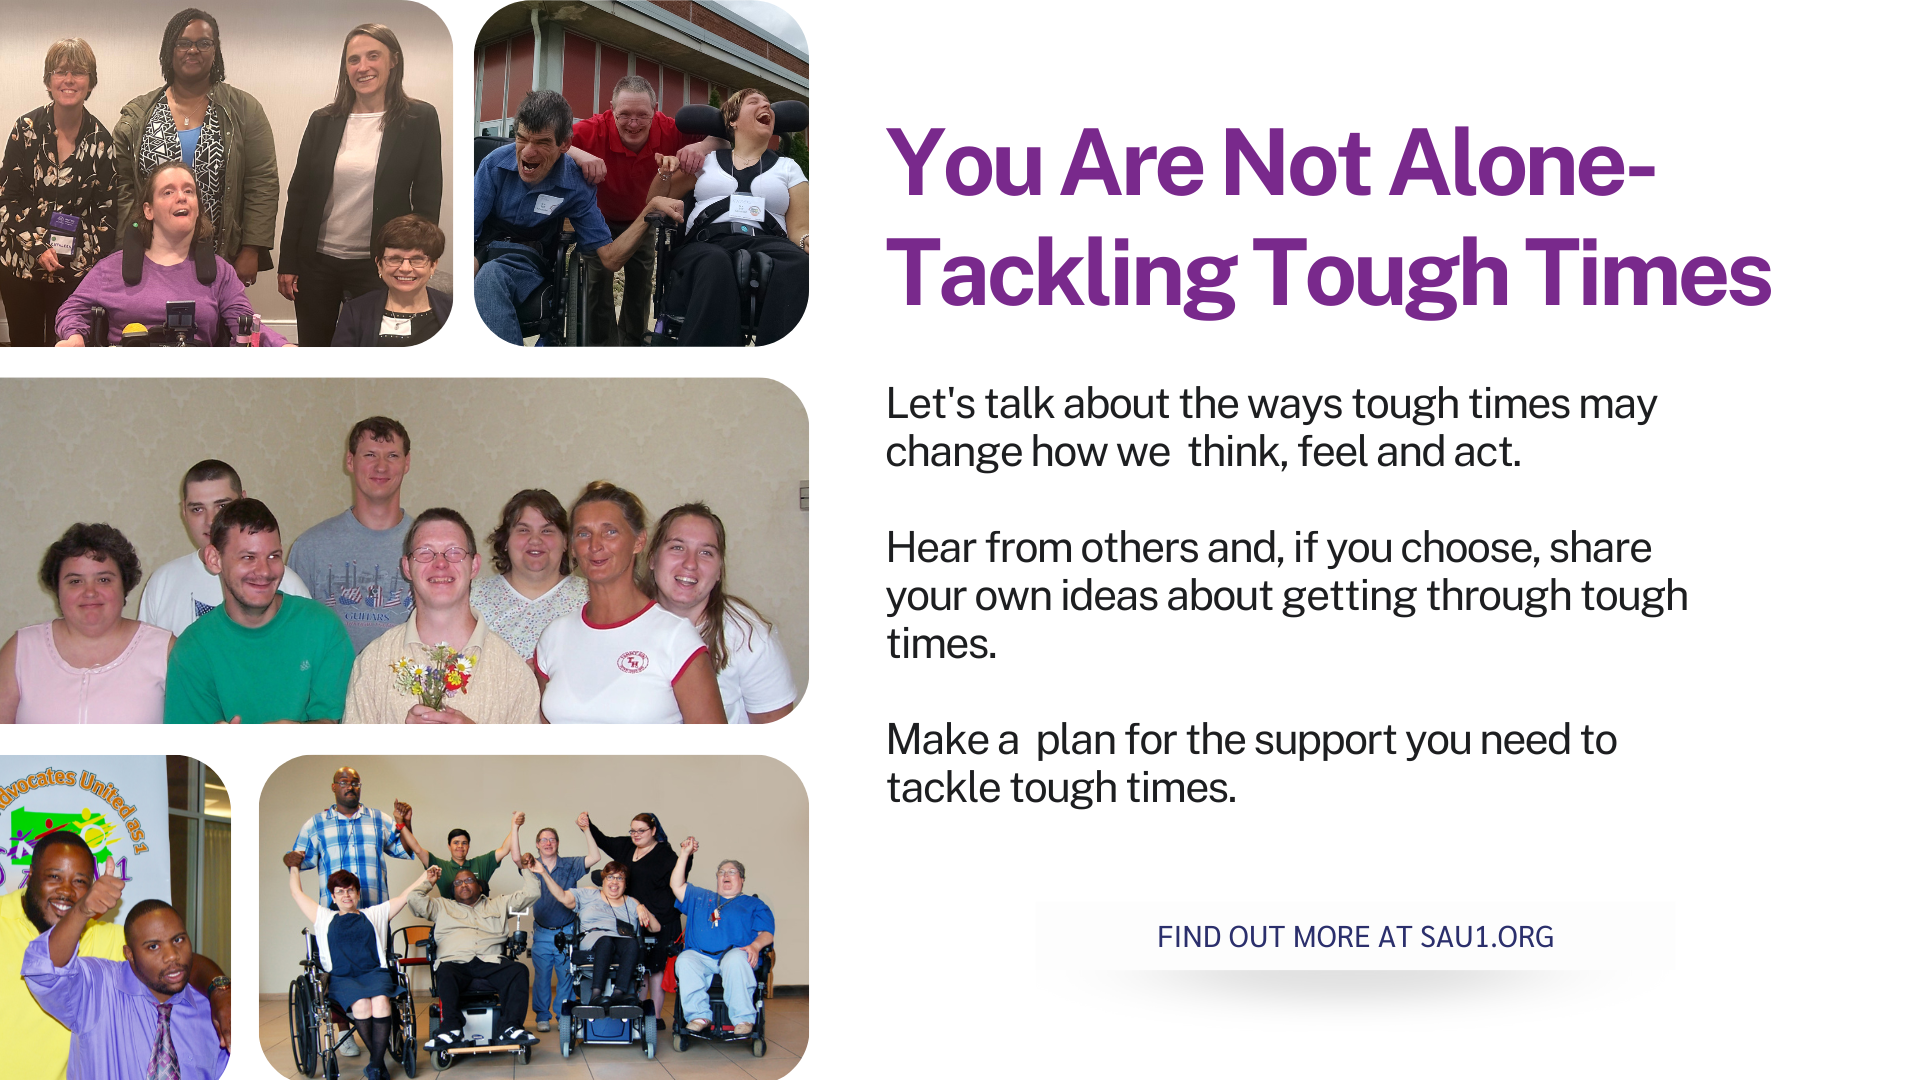 Banner. Text to the right of five photos of different groups of people says You Are Not Alone- Tackling Tough Times  Let's talk about the ways tough times may change how we think, feel and act.  Hear from others and, if you choose, share your own ideas about getting through tough times.  Make a plan for the support you need to tackle tough times.